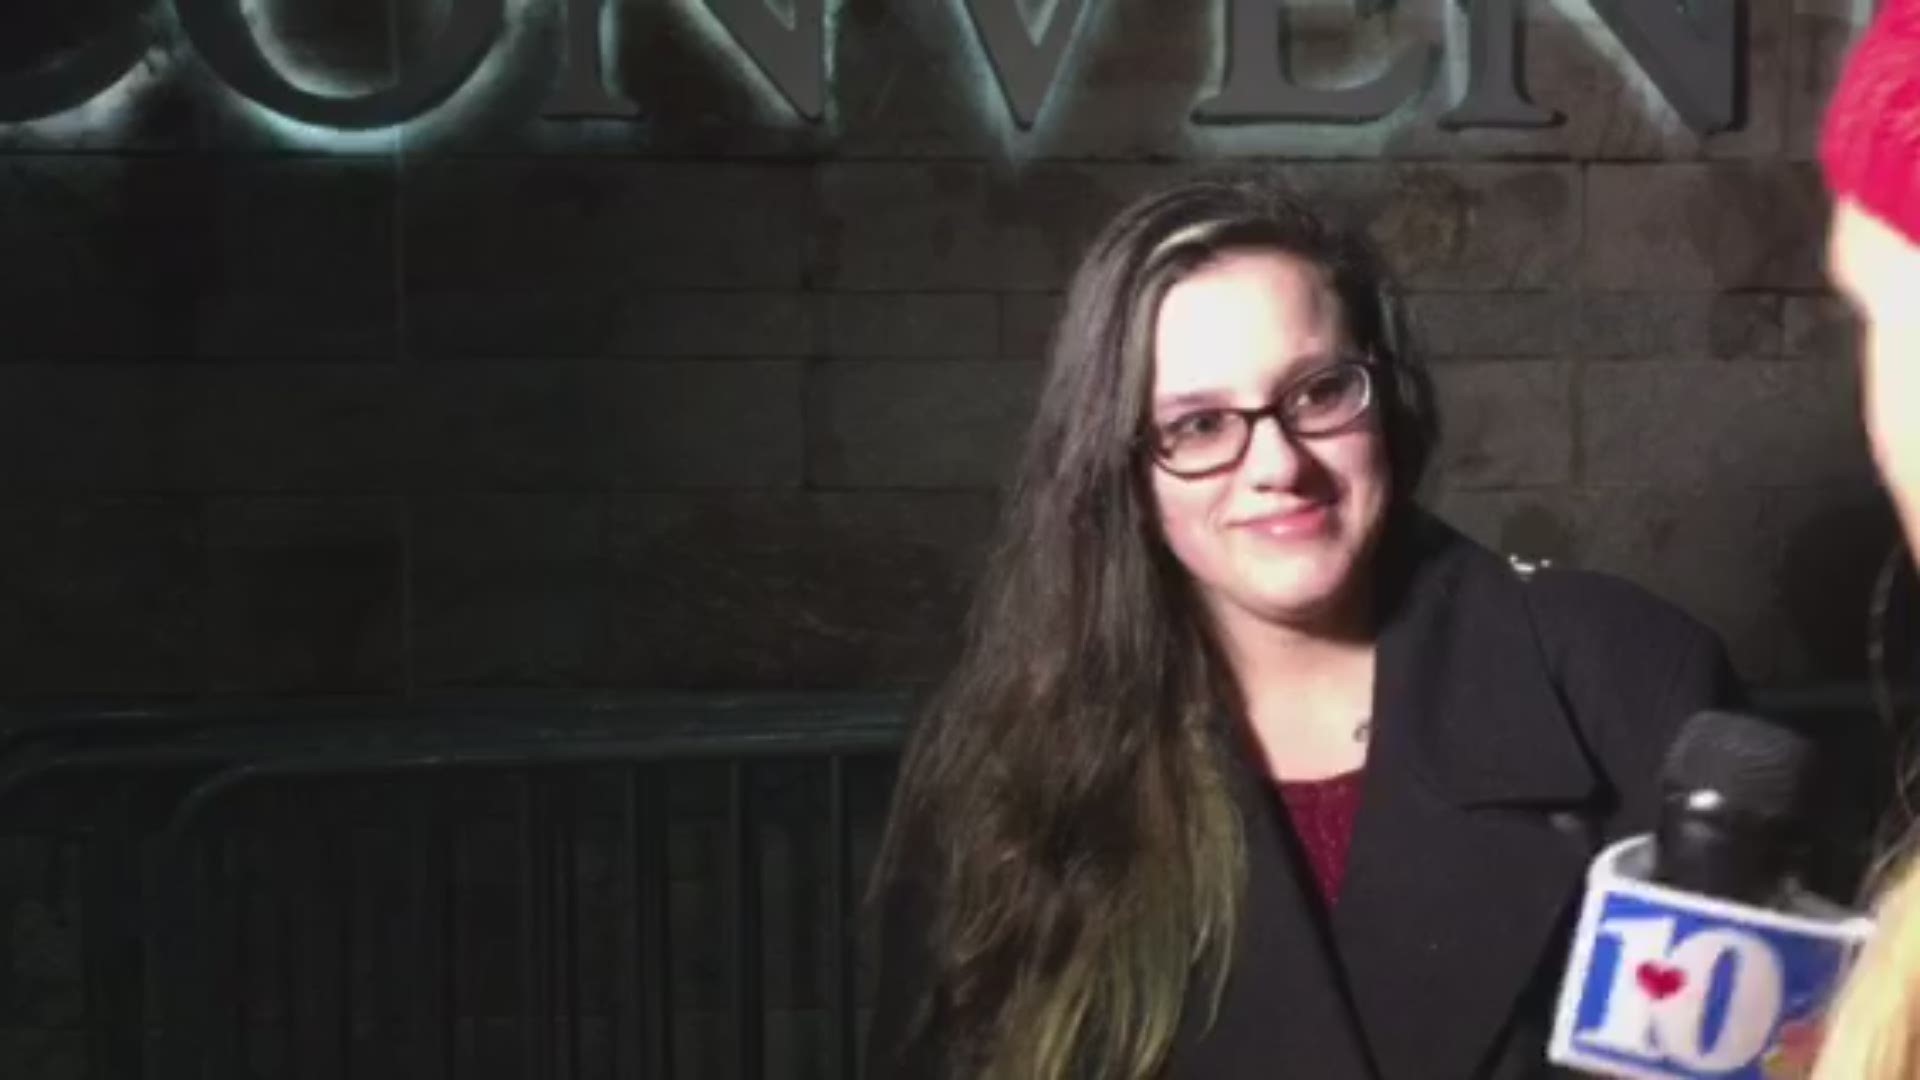 Ashley Vaughn was the first to get in line for the show's auditions in Knoxville.